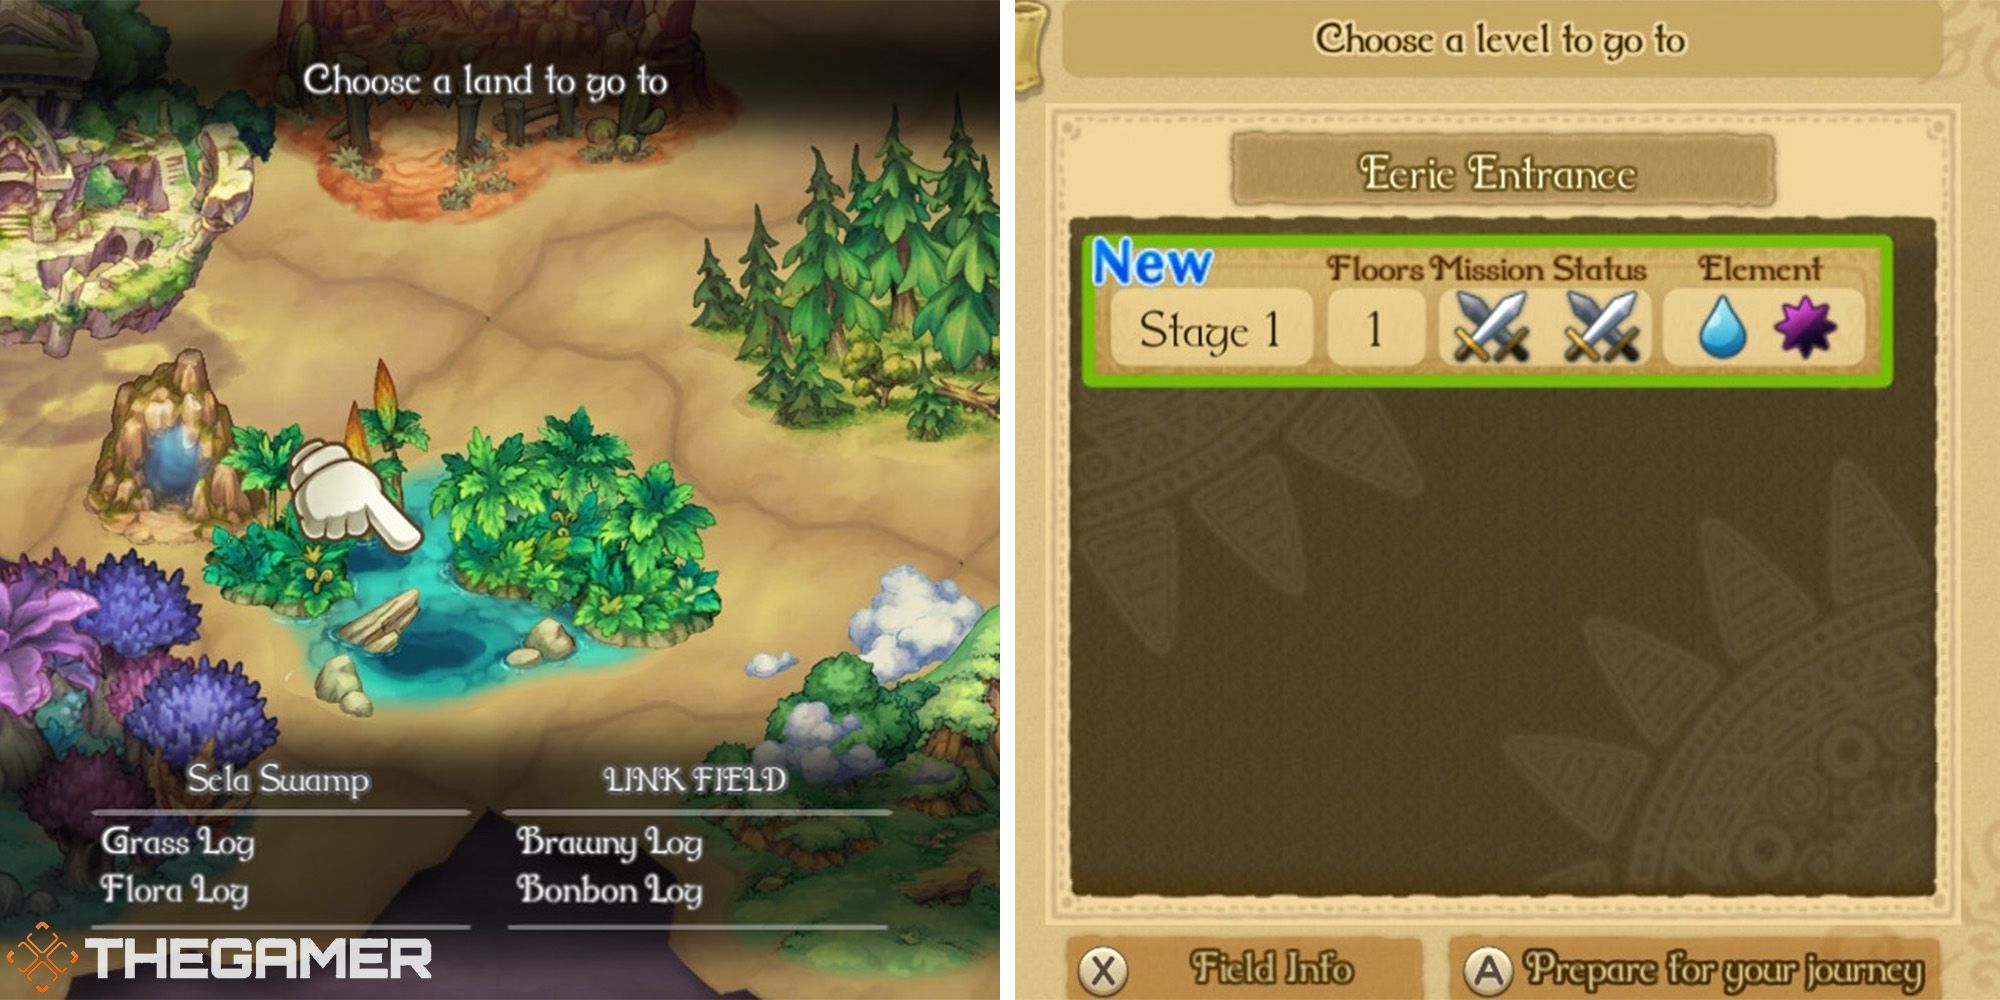 link field on map and stage selection split image